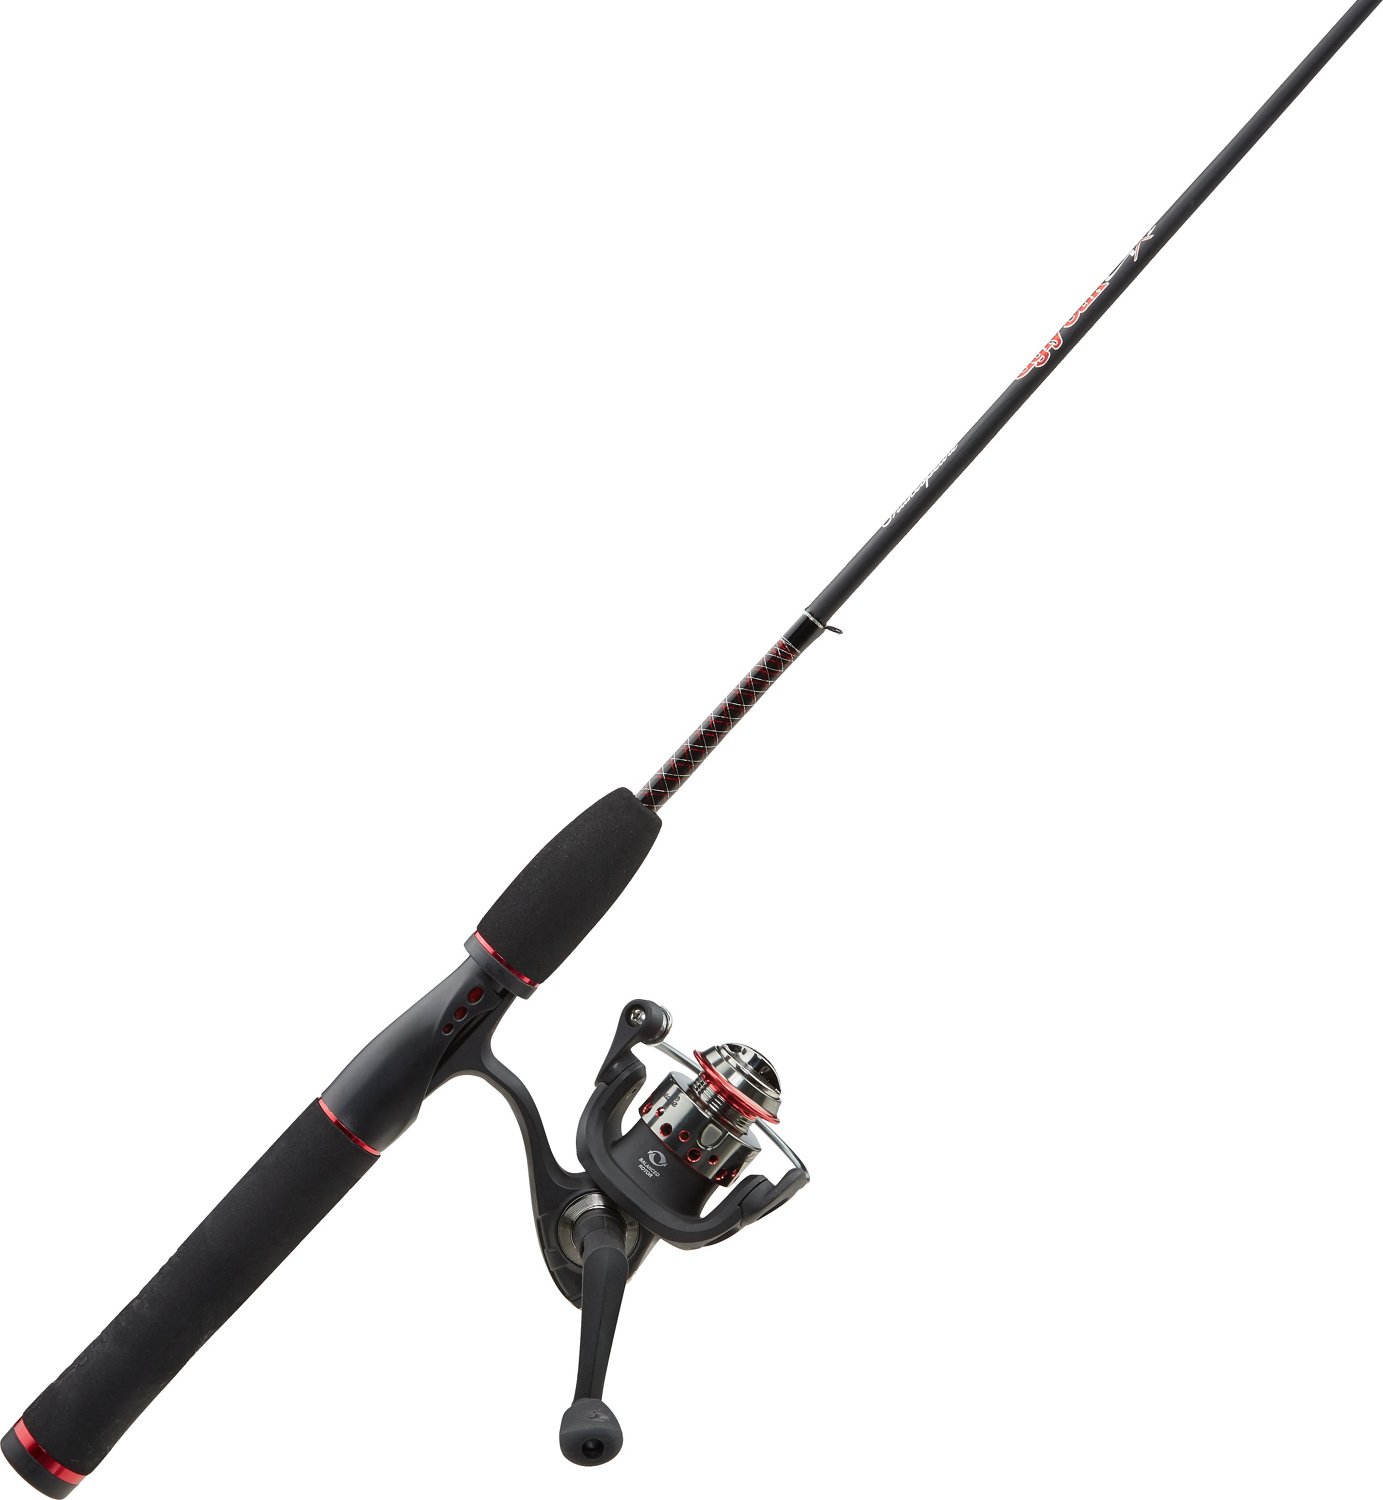 Shakespeare Ugly Stik 5'10” GX2 Spinning Rod, Three Piece Spinning Rod,  6-15lb Line Rating, Medium Rod Power, Moderate Fast Action, 1/8-5/8 oz.  Lure